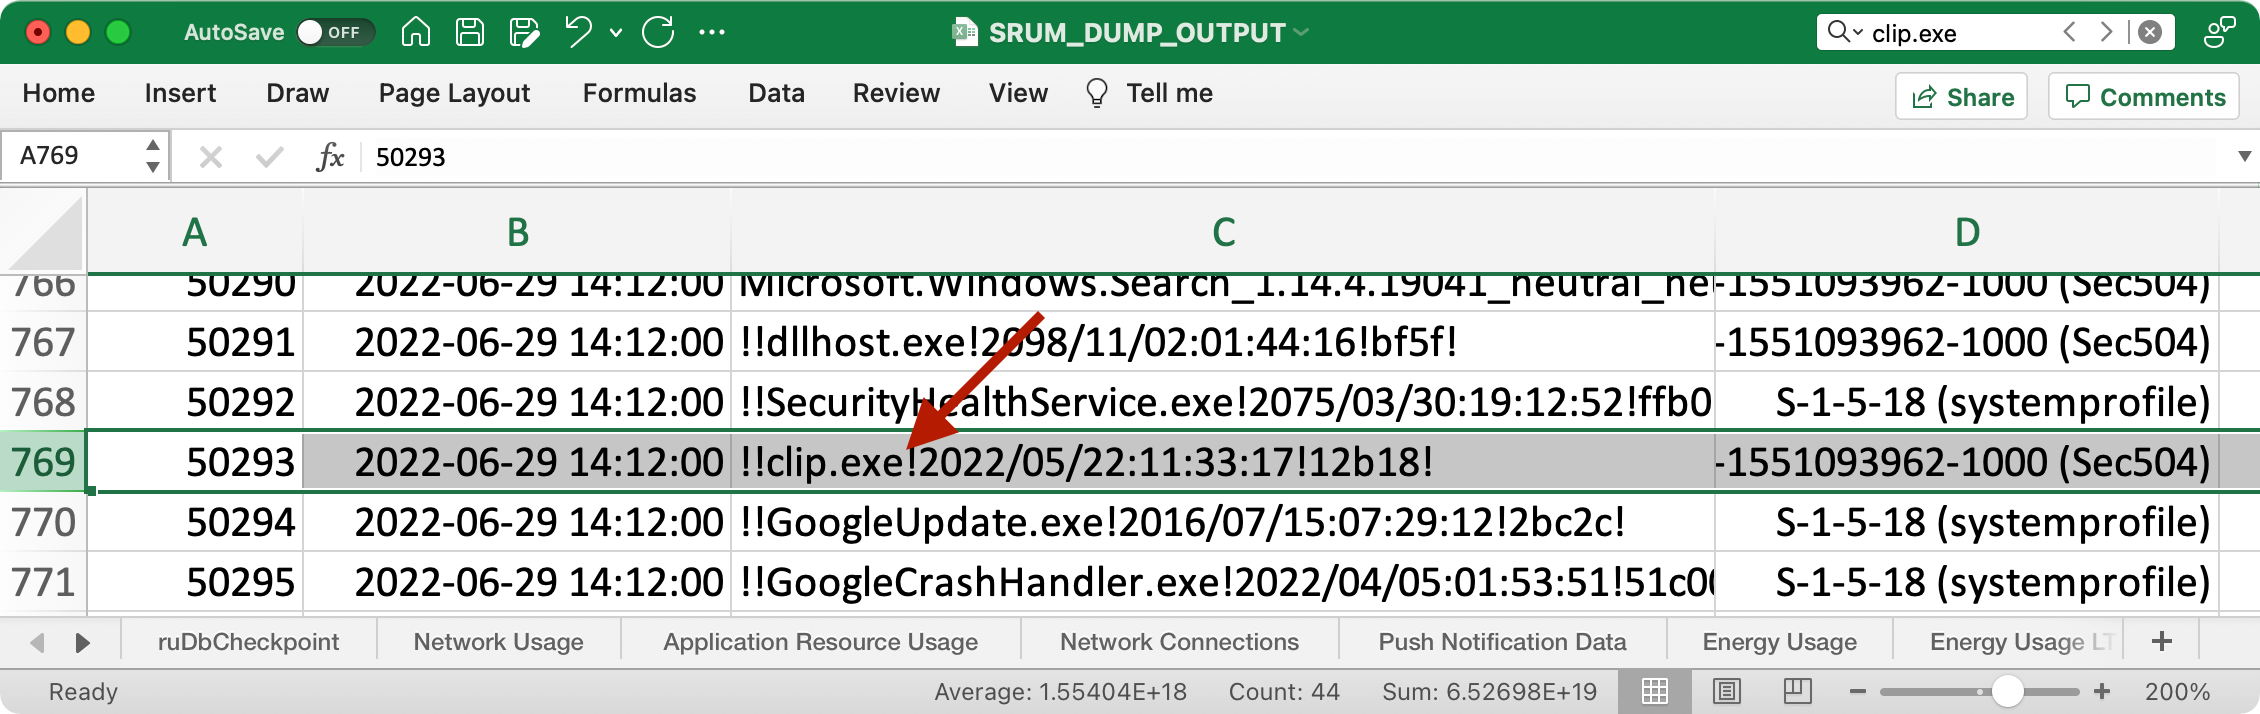 Excel spreadsheet titled SRUM_DUMP_OUTPUT showing output of SRUM-Dump tool; arrow pointing to entry indicating execution of clip.exe